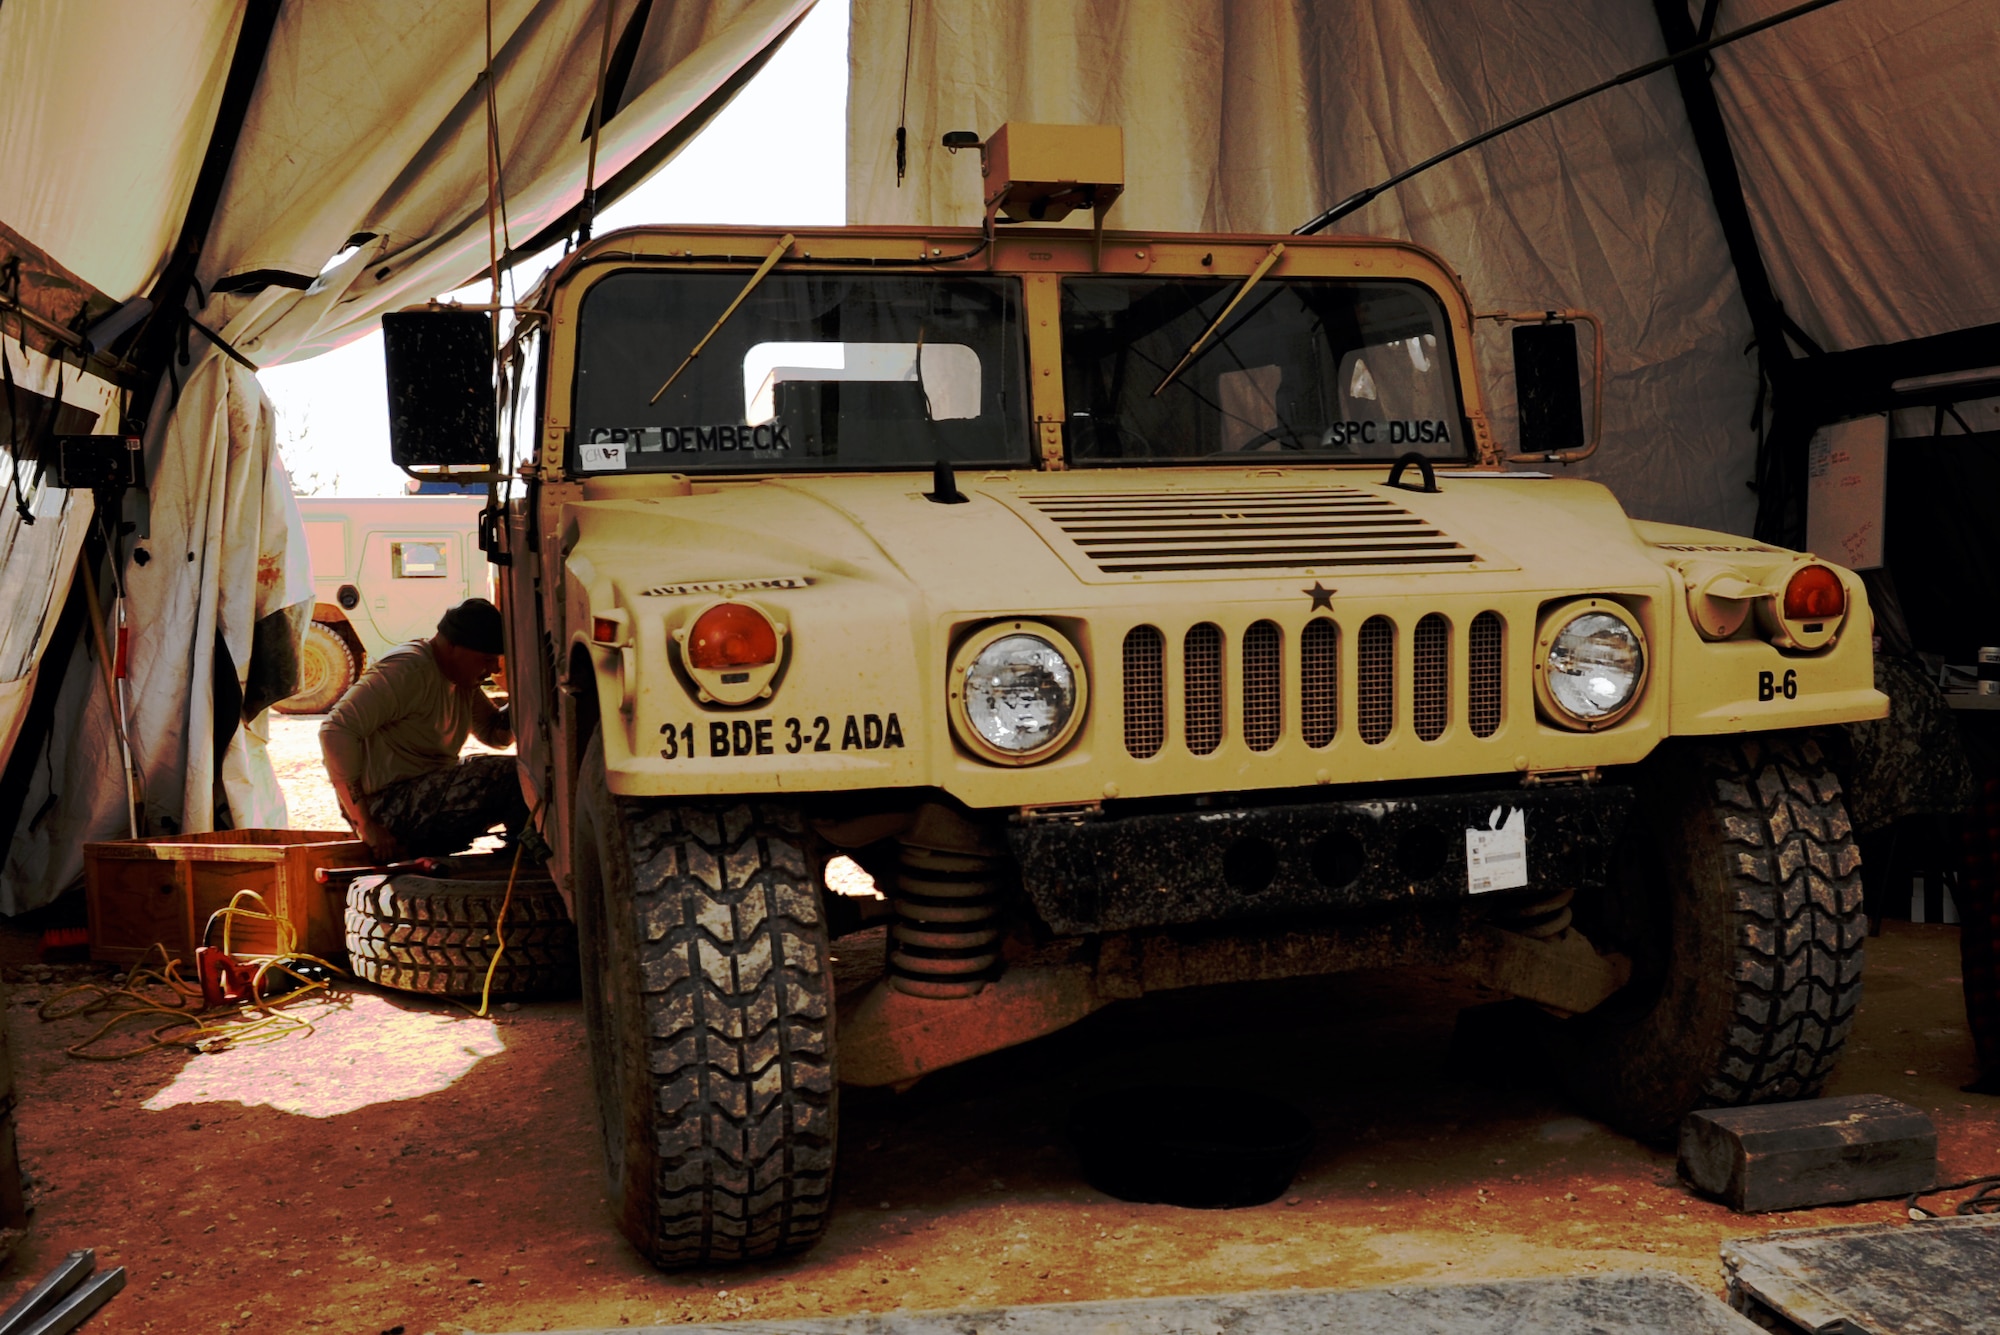 U.S. Army Staff Sgt. Gaston Henderson, 3rd Battalion, 2nd Air Defense Artillery maintainer, works on a Humvee in a maintenance tent Feb. 28, 2013, near Gaziantep, Turkey. The 3-2 ADA from Fort Sill, Okla. is deployed to Turkey as part of a cooperative solution to promote regional stability by augmenting Turkey’s air defenses. (U.S. Air Force photo by Senior Airman Daniel Phelps/Released)